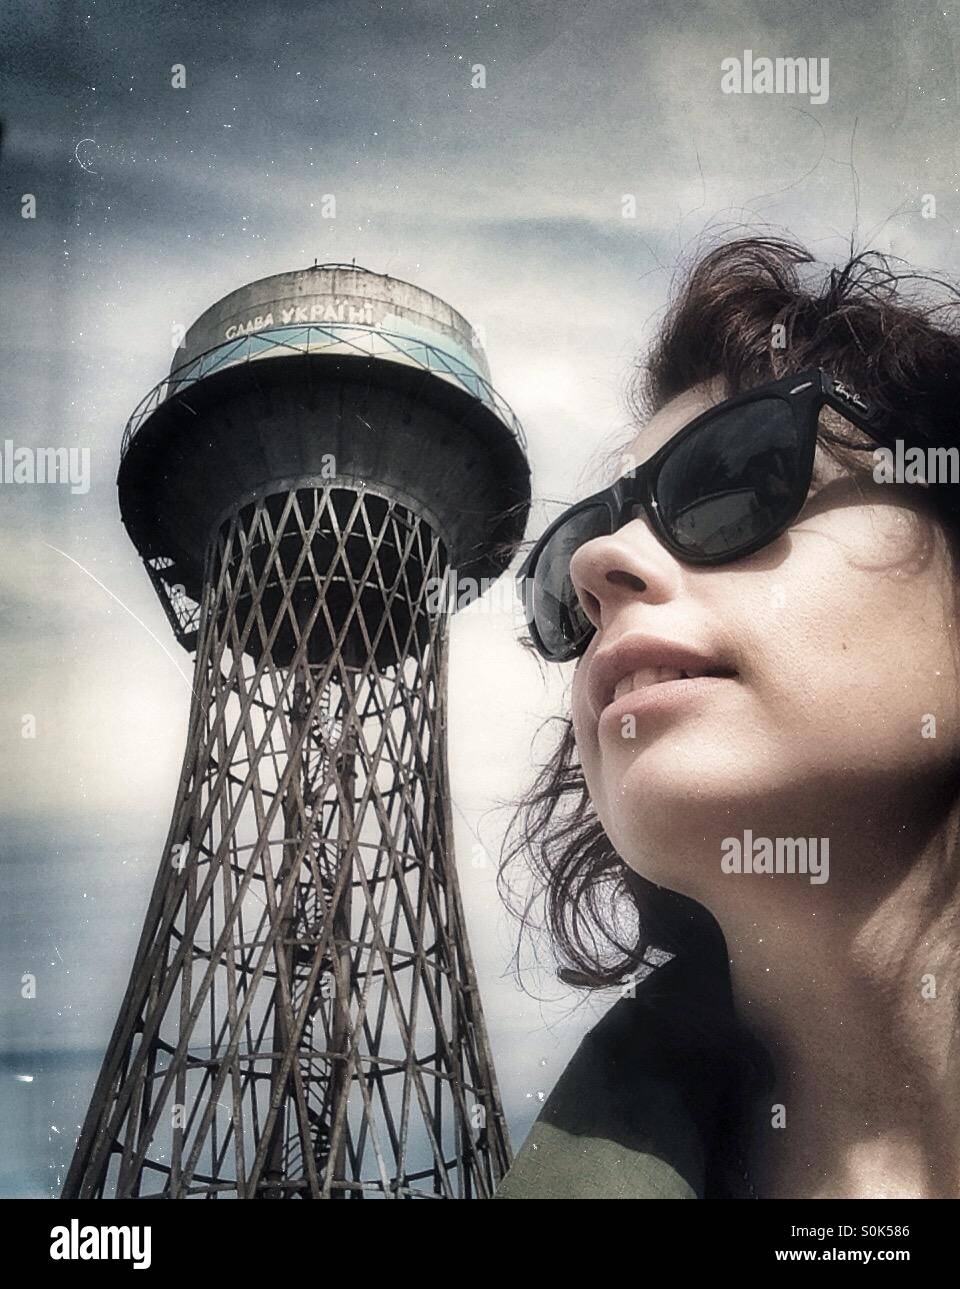 Selfie of woman in a sunglasses and water tower with sign Glory to Ukraine Stock Photo